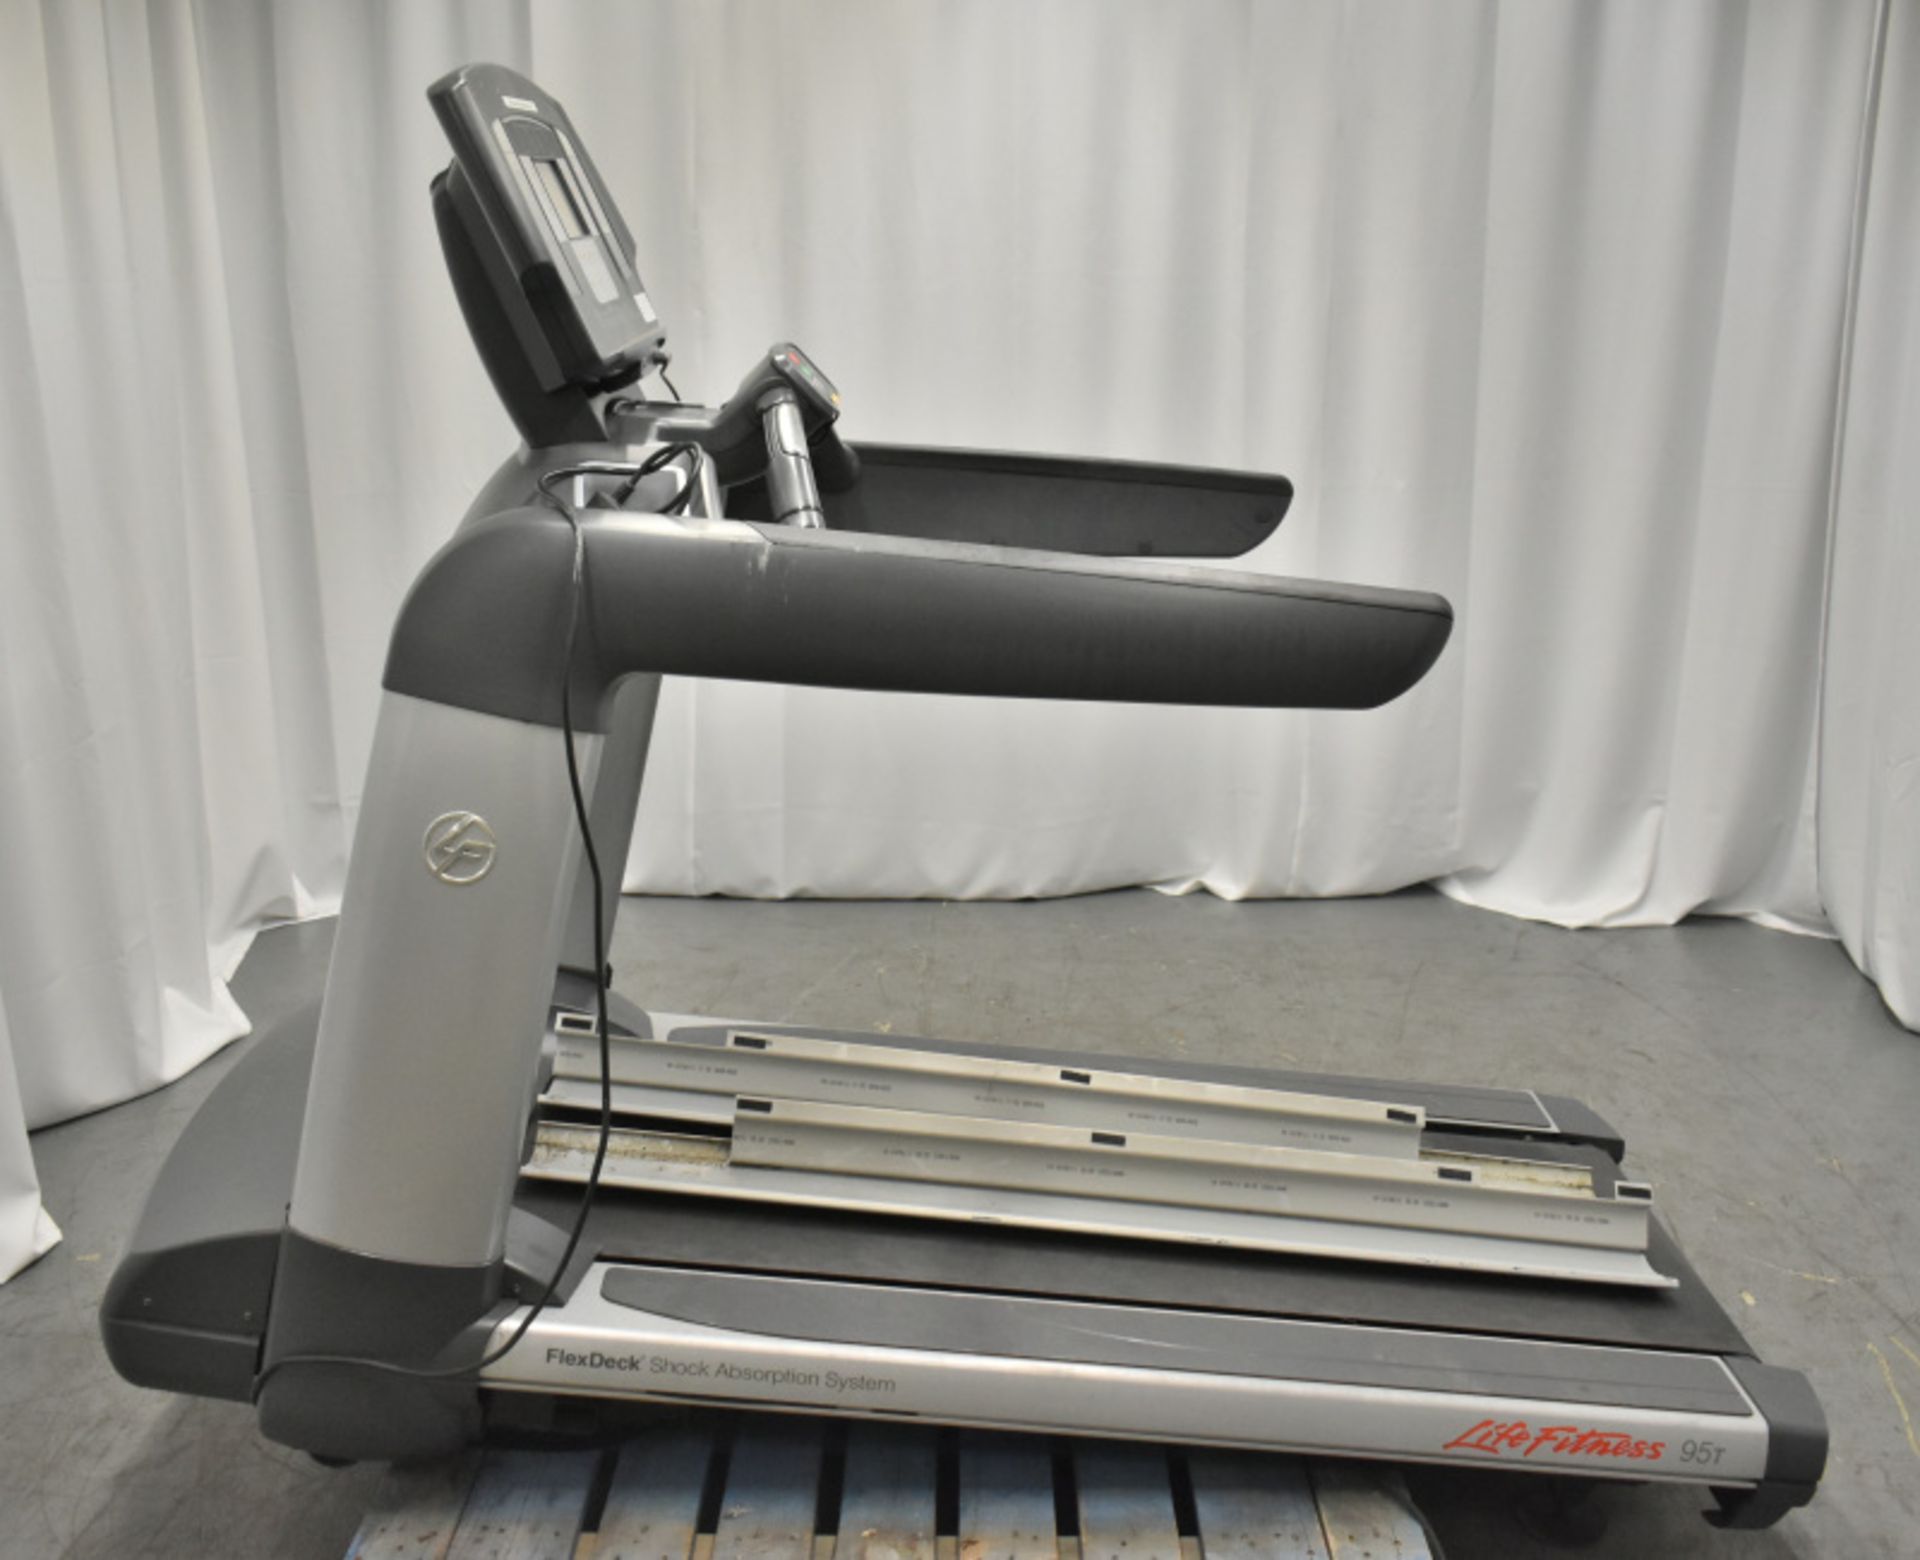 Life Fitness 95T FlexDeck Treadmill - Powers Up Functions Not Tested